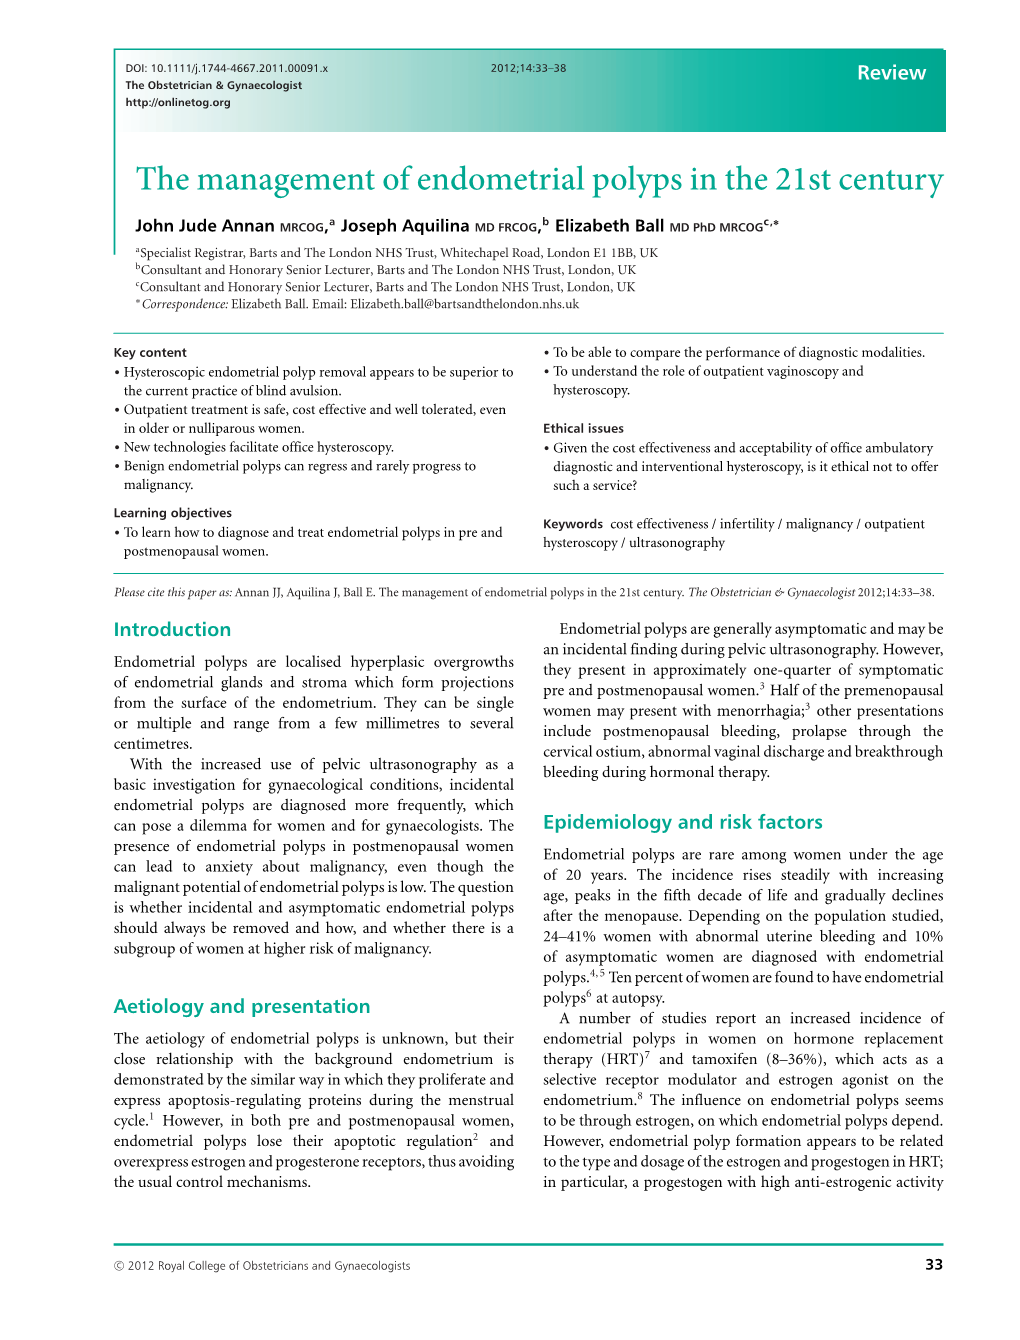 The Management of Endometrial Polyps in the 21St Century